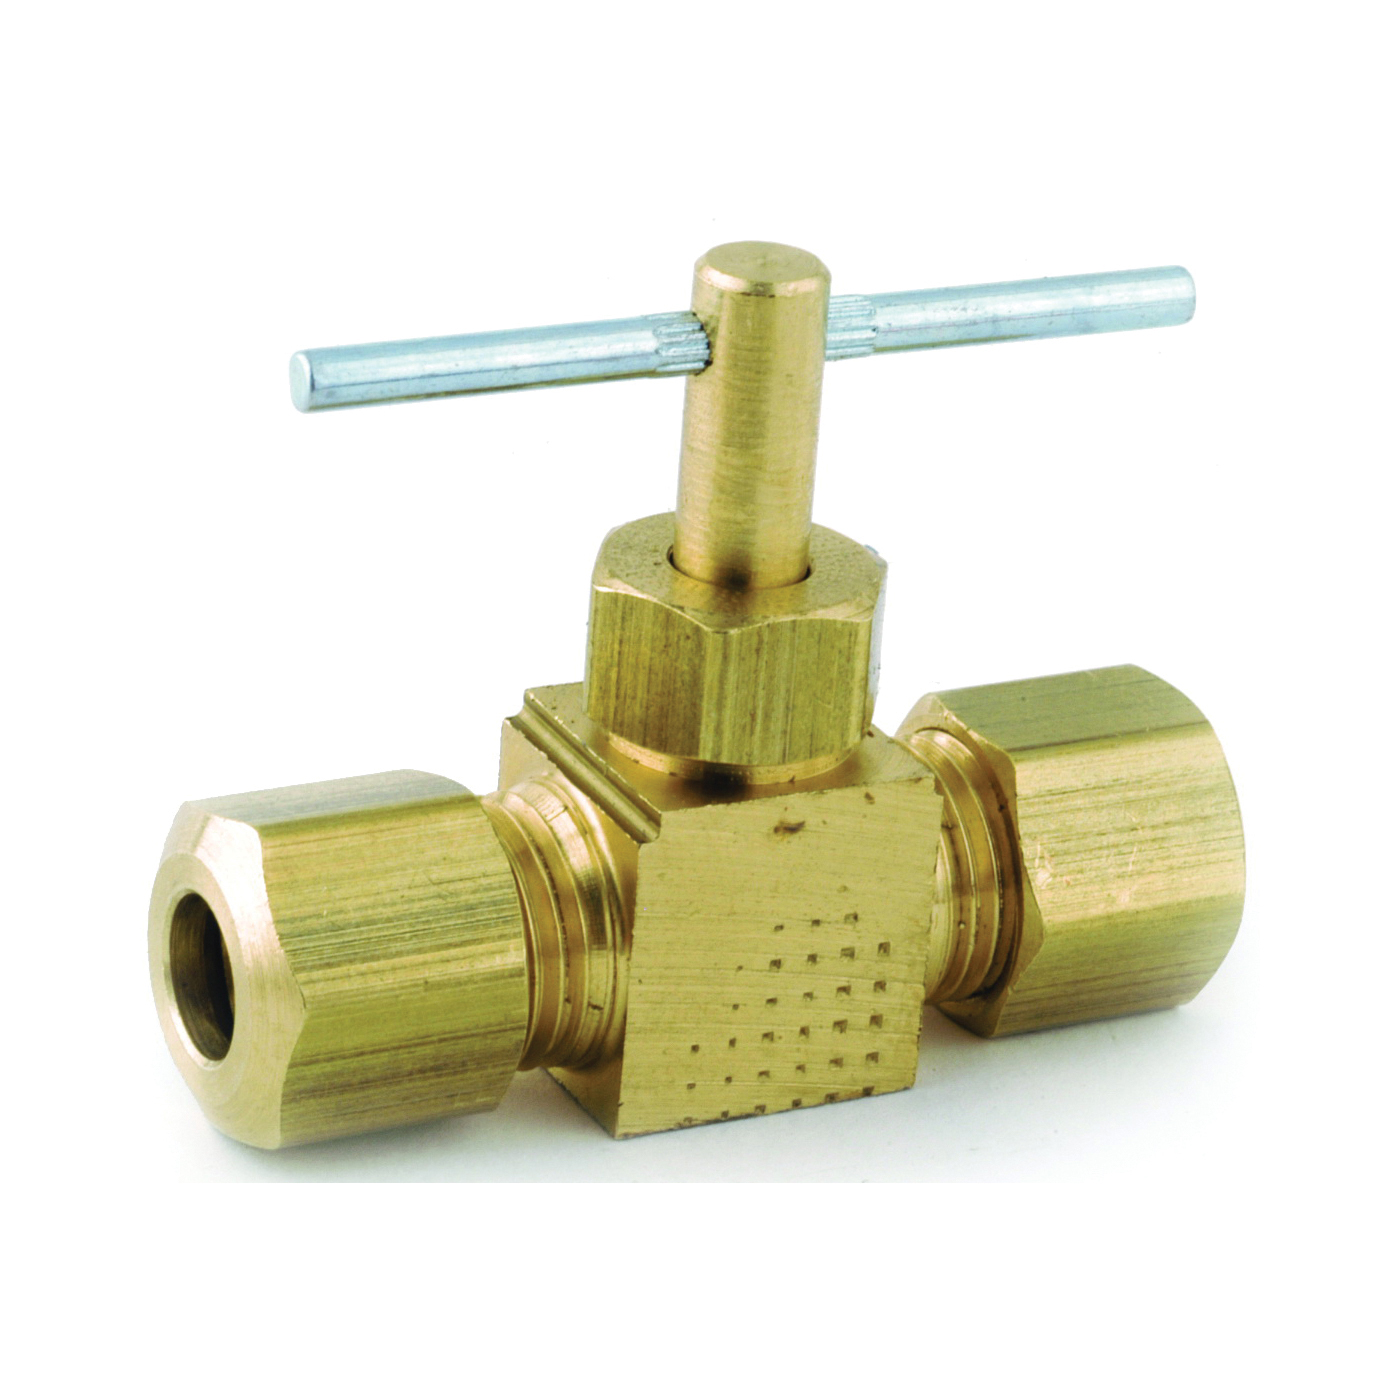 Anderson Metals 759106-06 Straight Needle Shut-Off Valve, 3/8 in Connection, Compression, Brass Body - 1